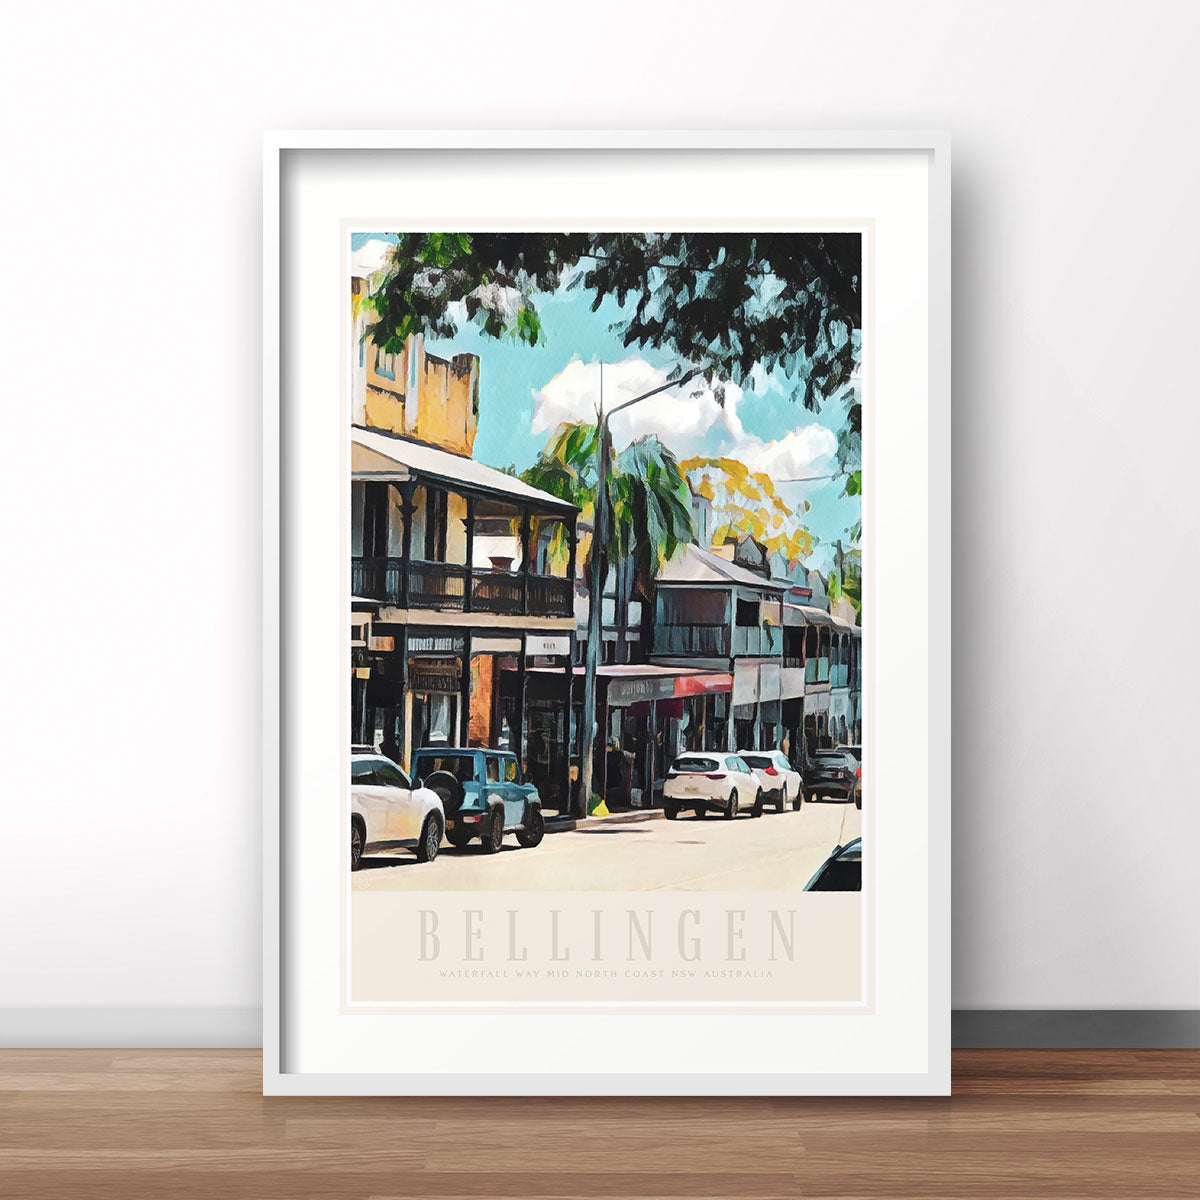 Bellingen vintage retro travel poster print from Places We Luv